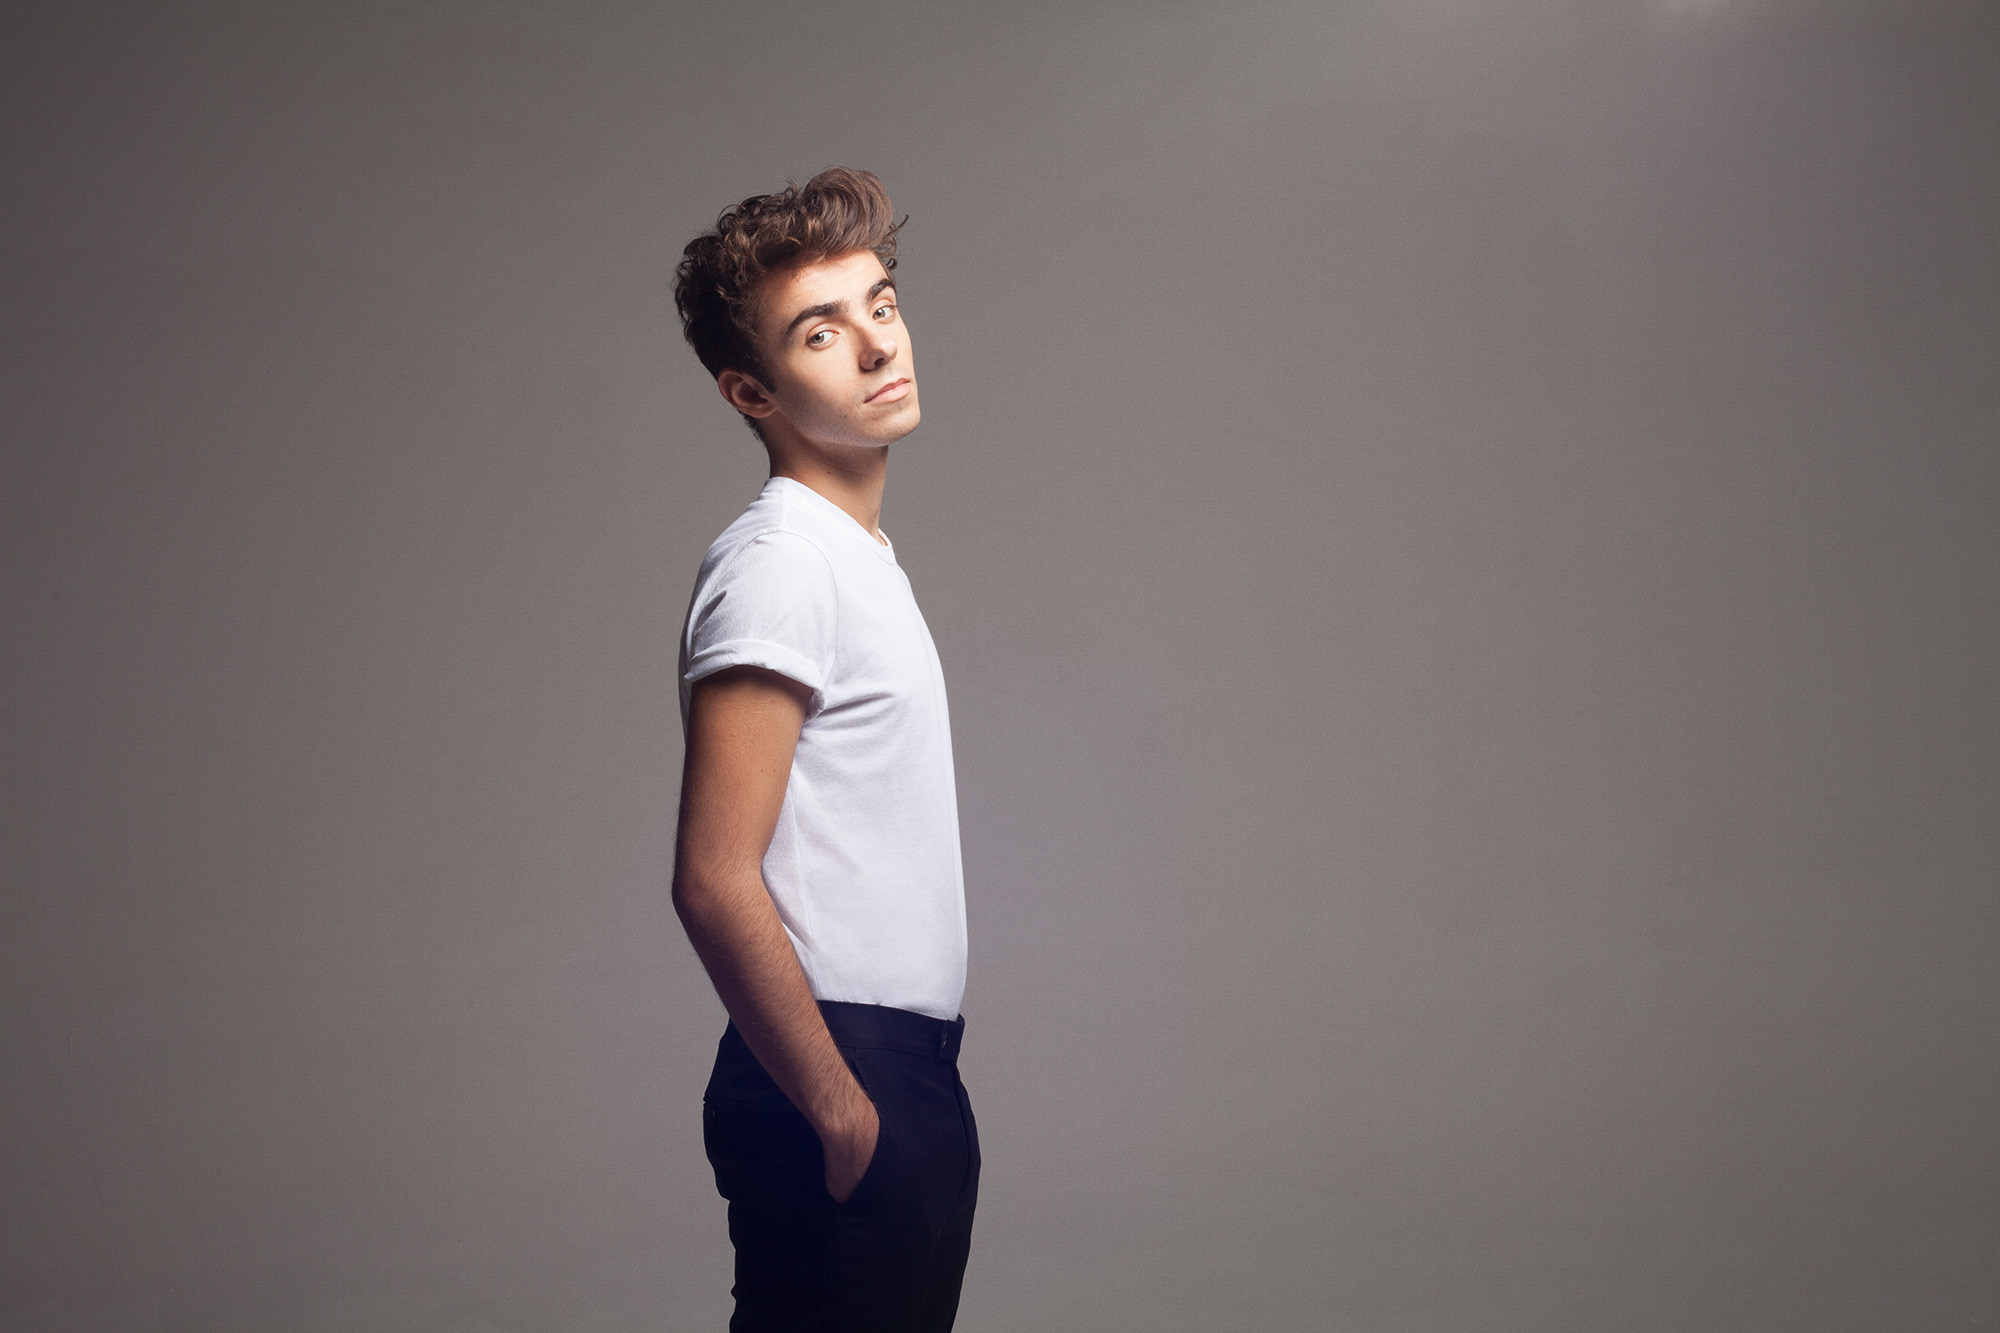 Nathan Sykes: Welcome to the Music Industry